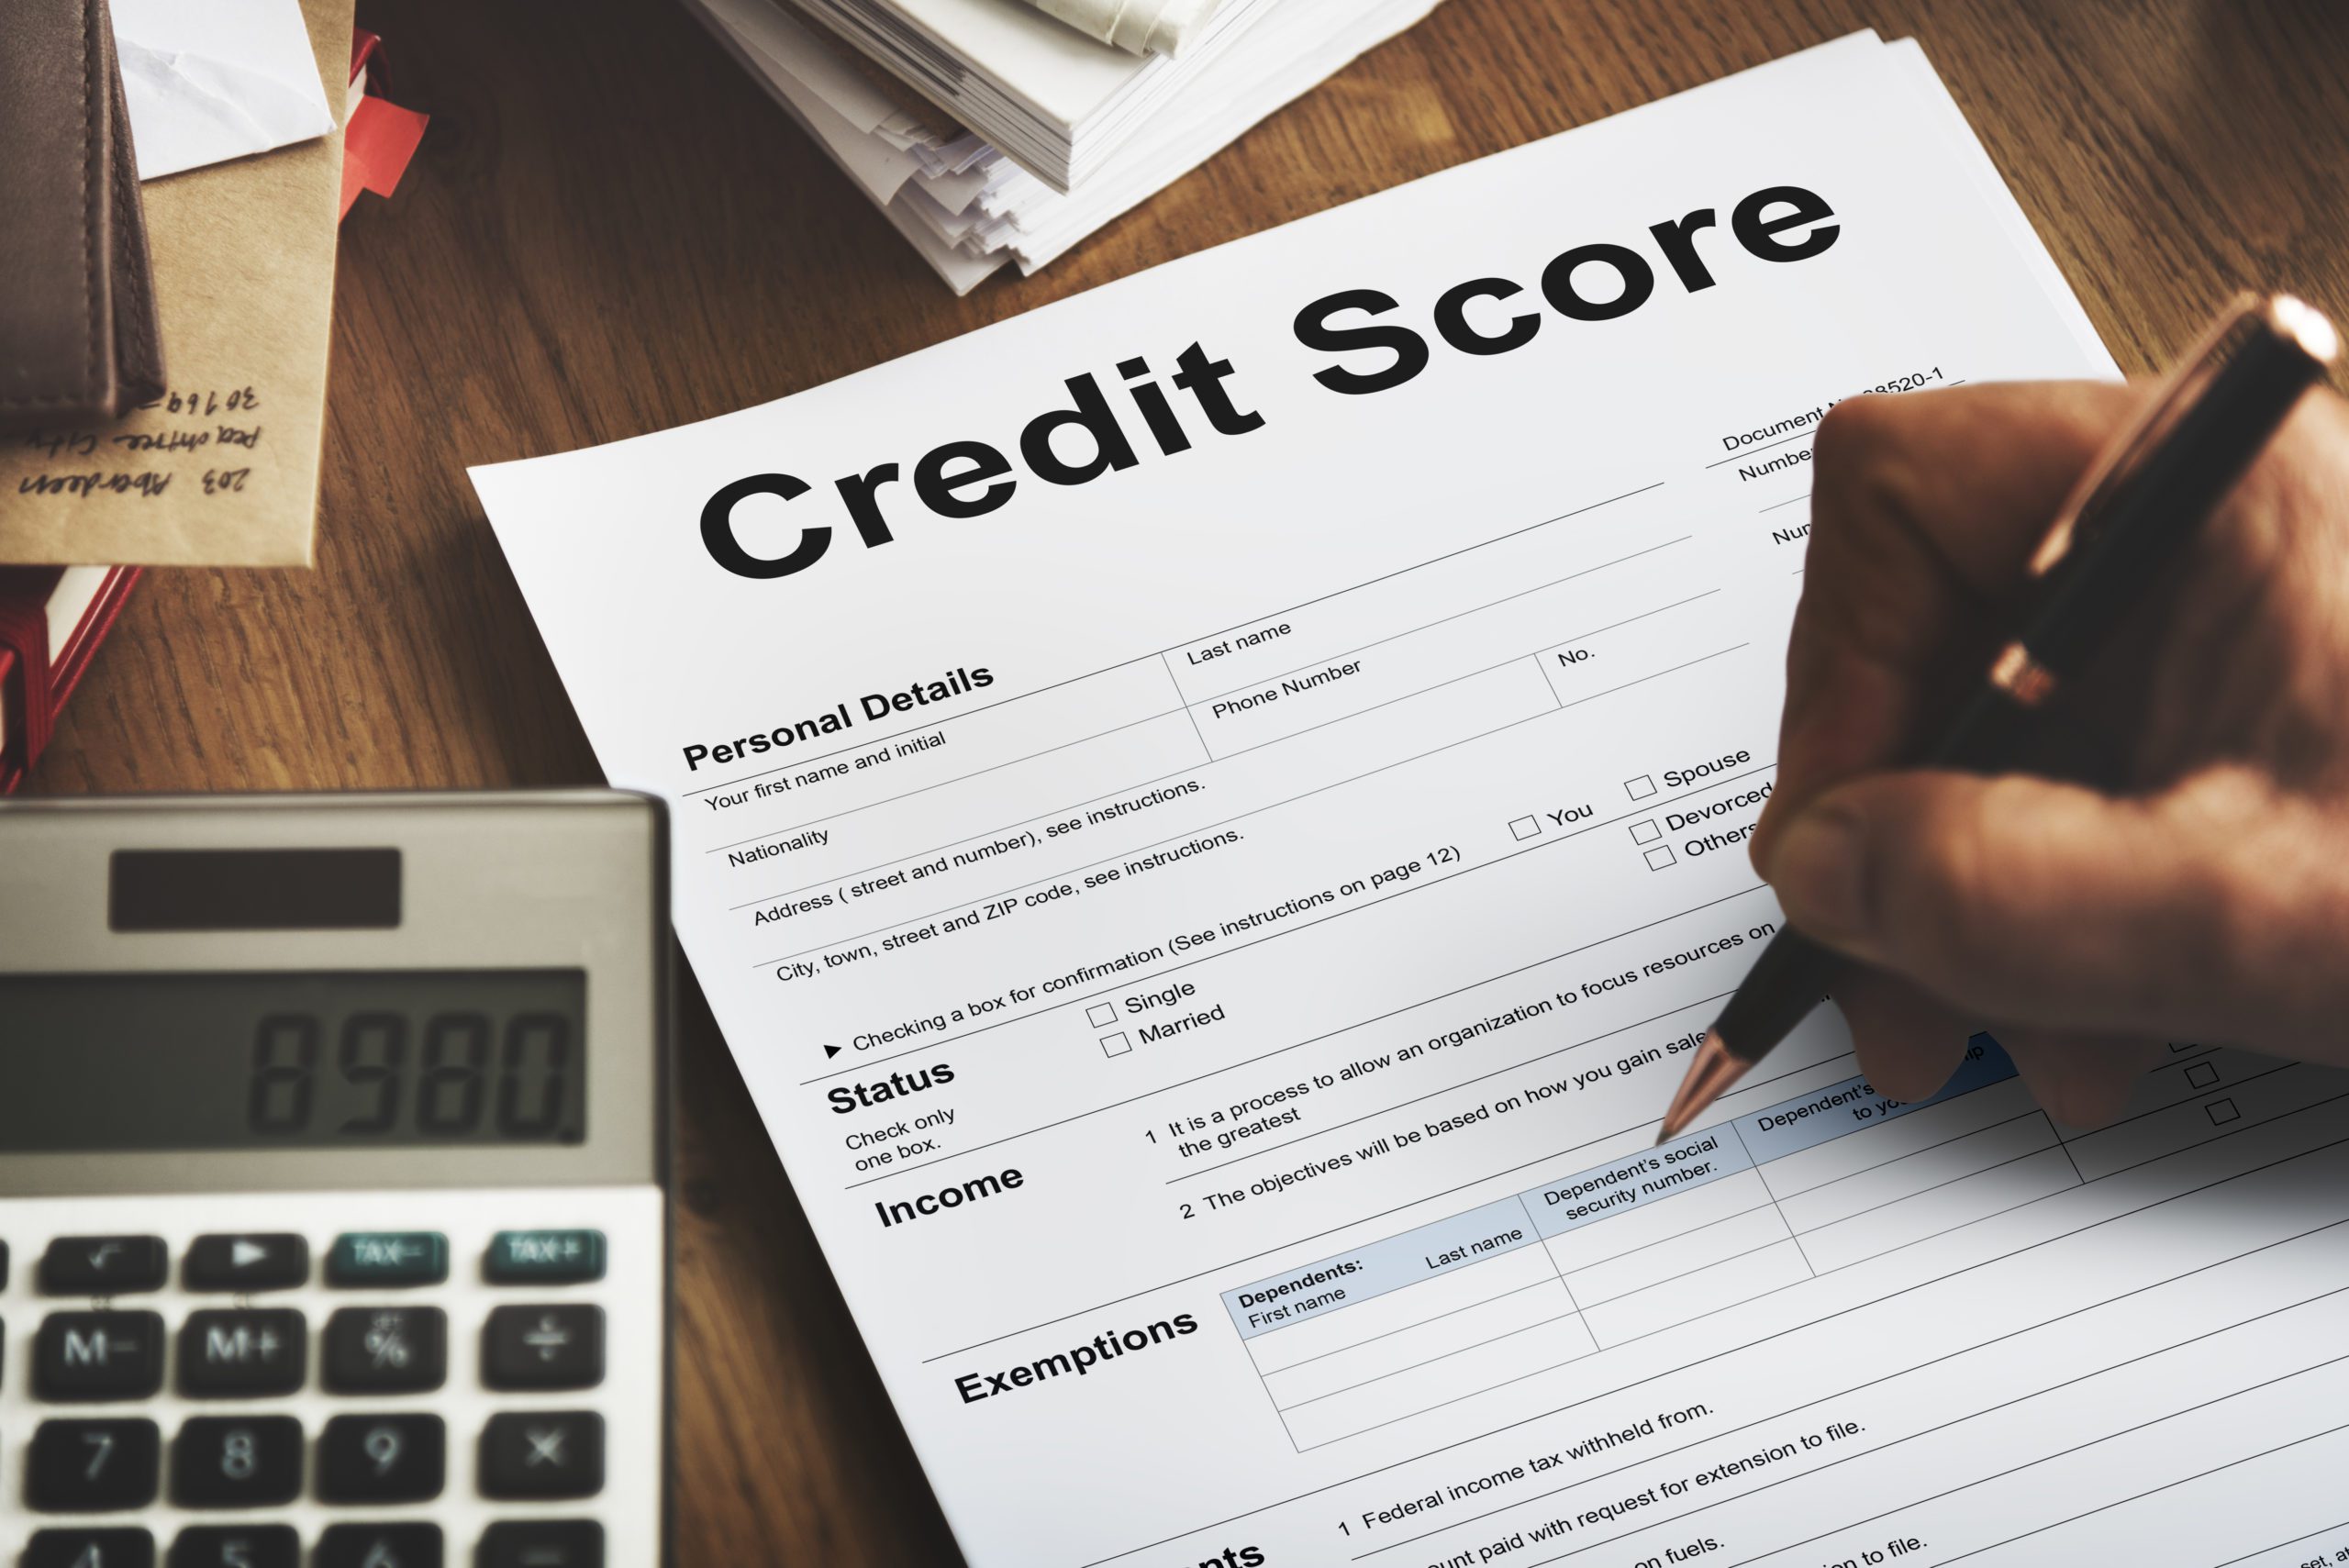 Credit Score Financial Banking Economy Concept